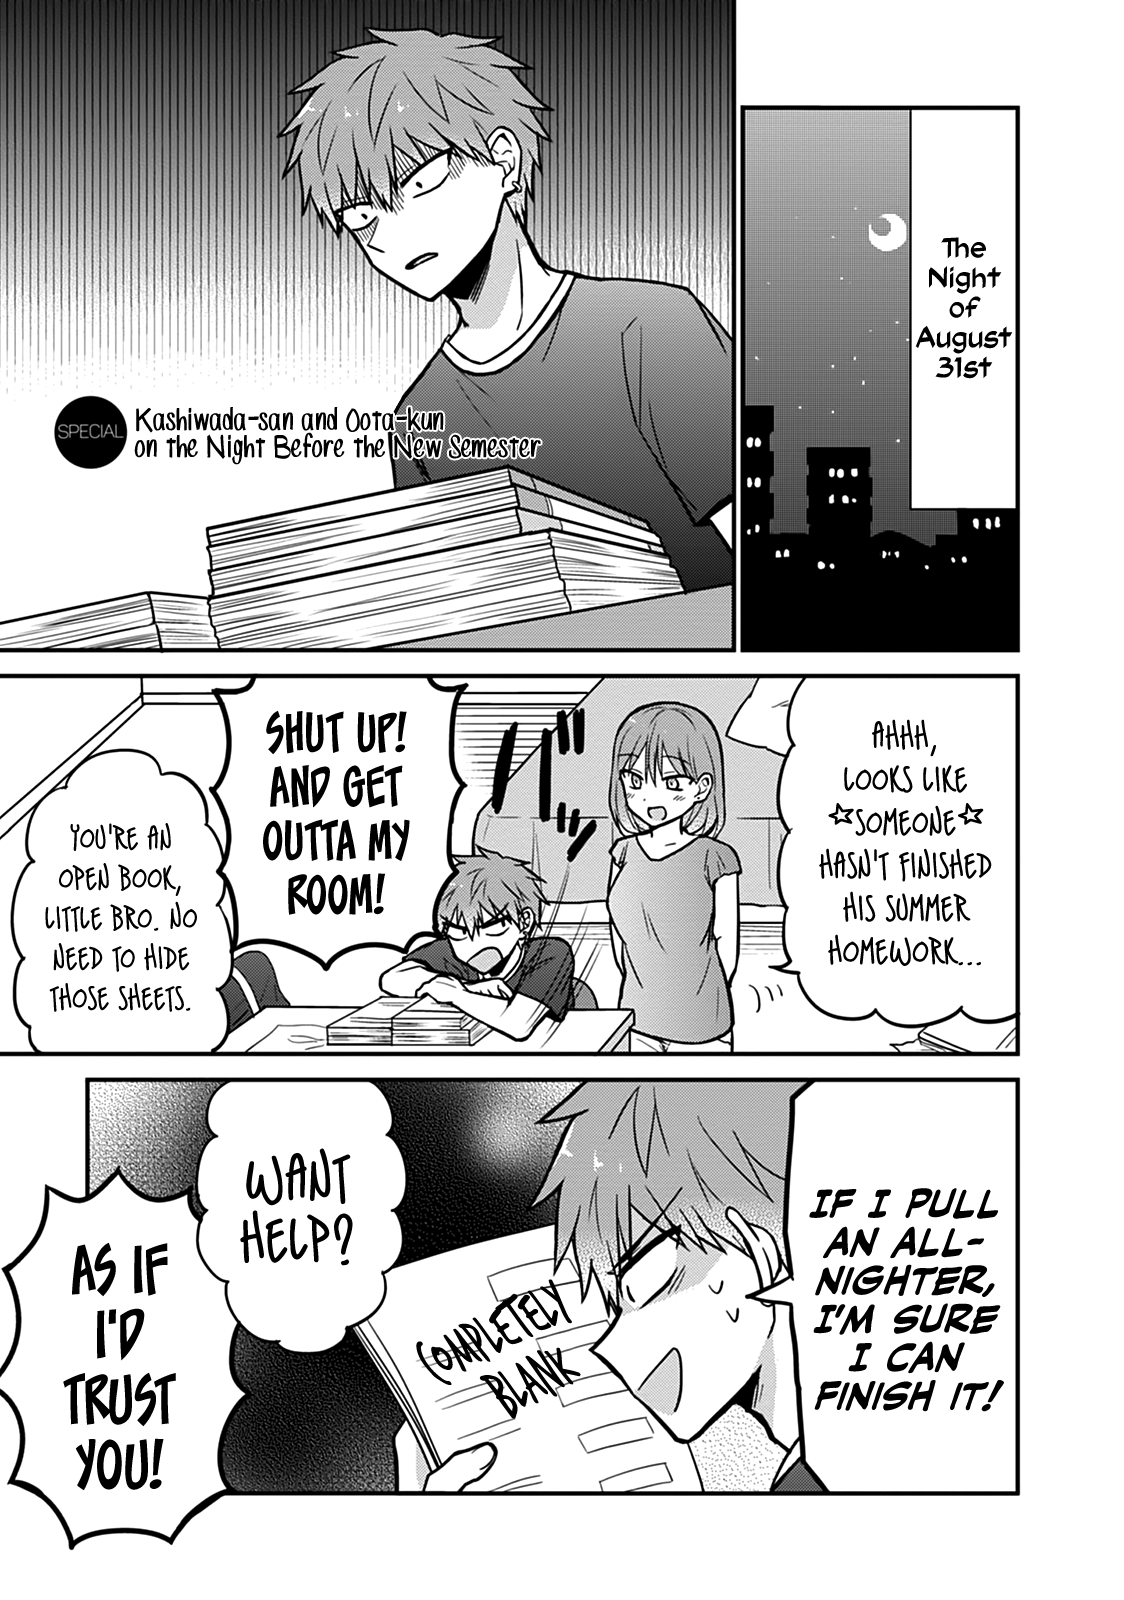 Expressionless Kashiwada-San And Emotional Oota-Kun Vol.3 Chapter 37.5: Kashiwada-San And Oota-Kun On The Night Before The New Semester - Picture 1